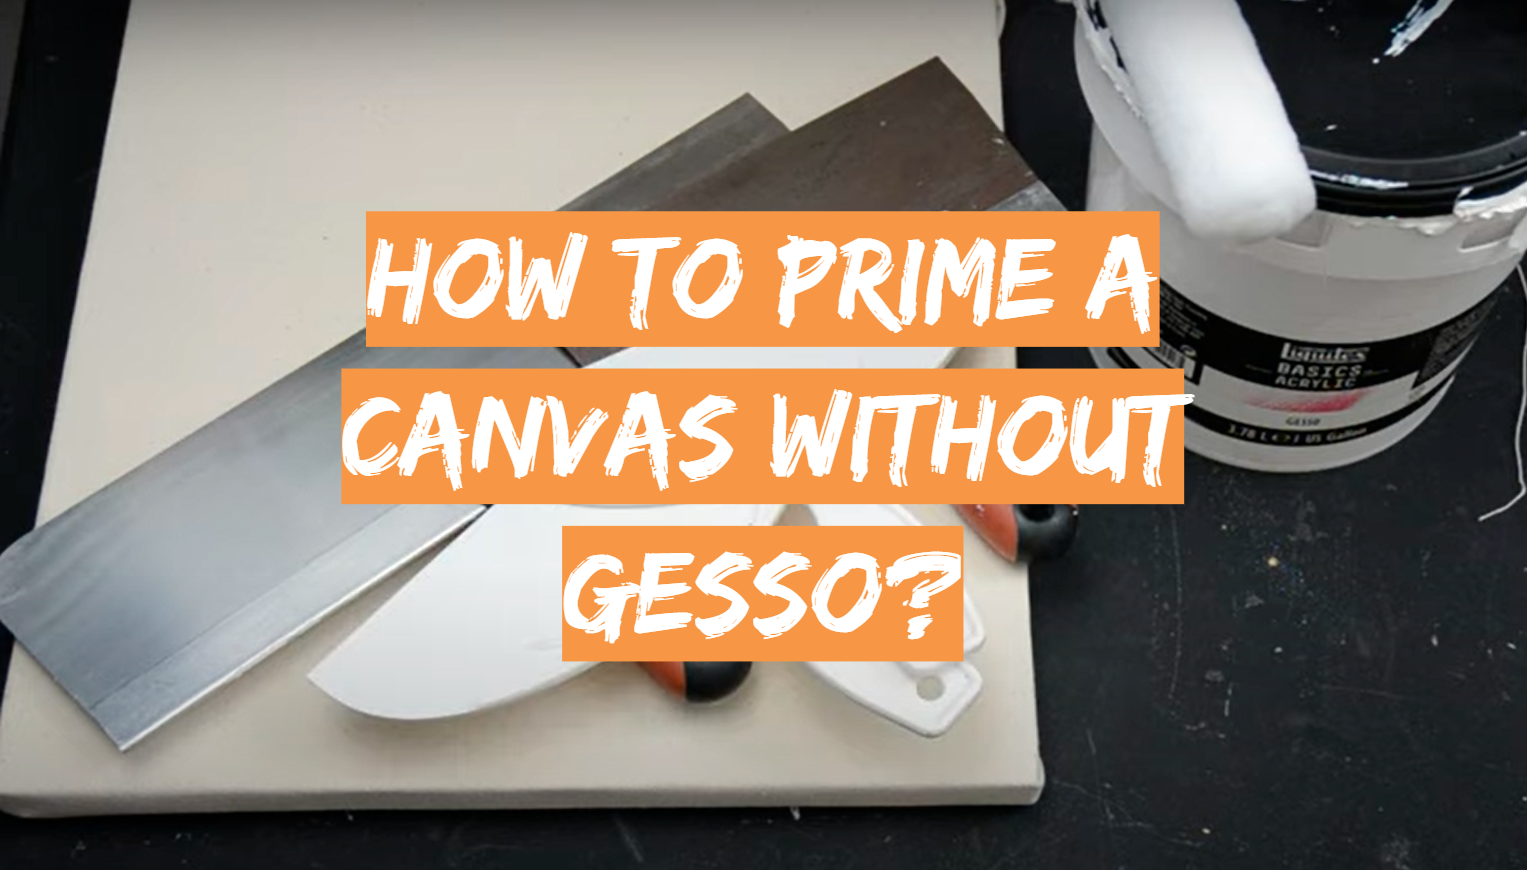 How to Prime a Canvas Without Gesso?